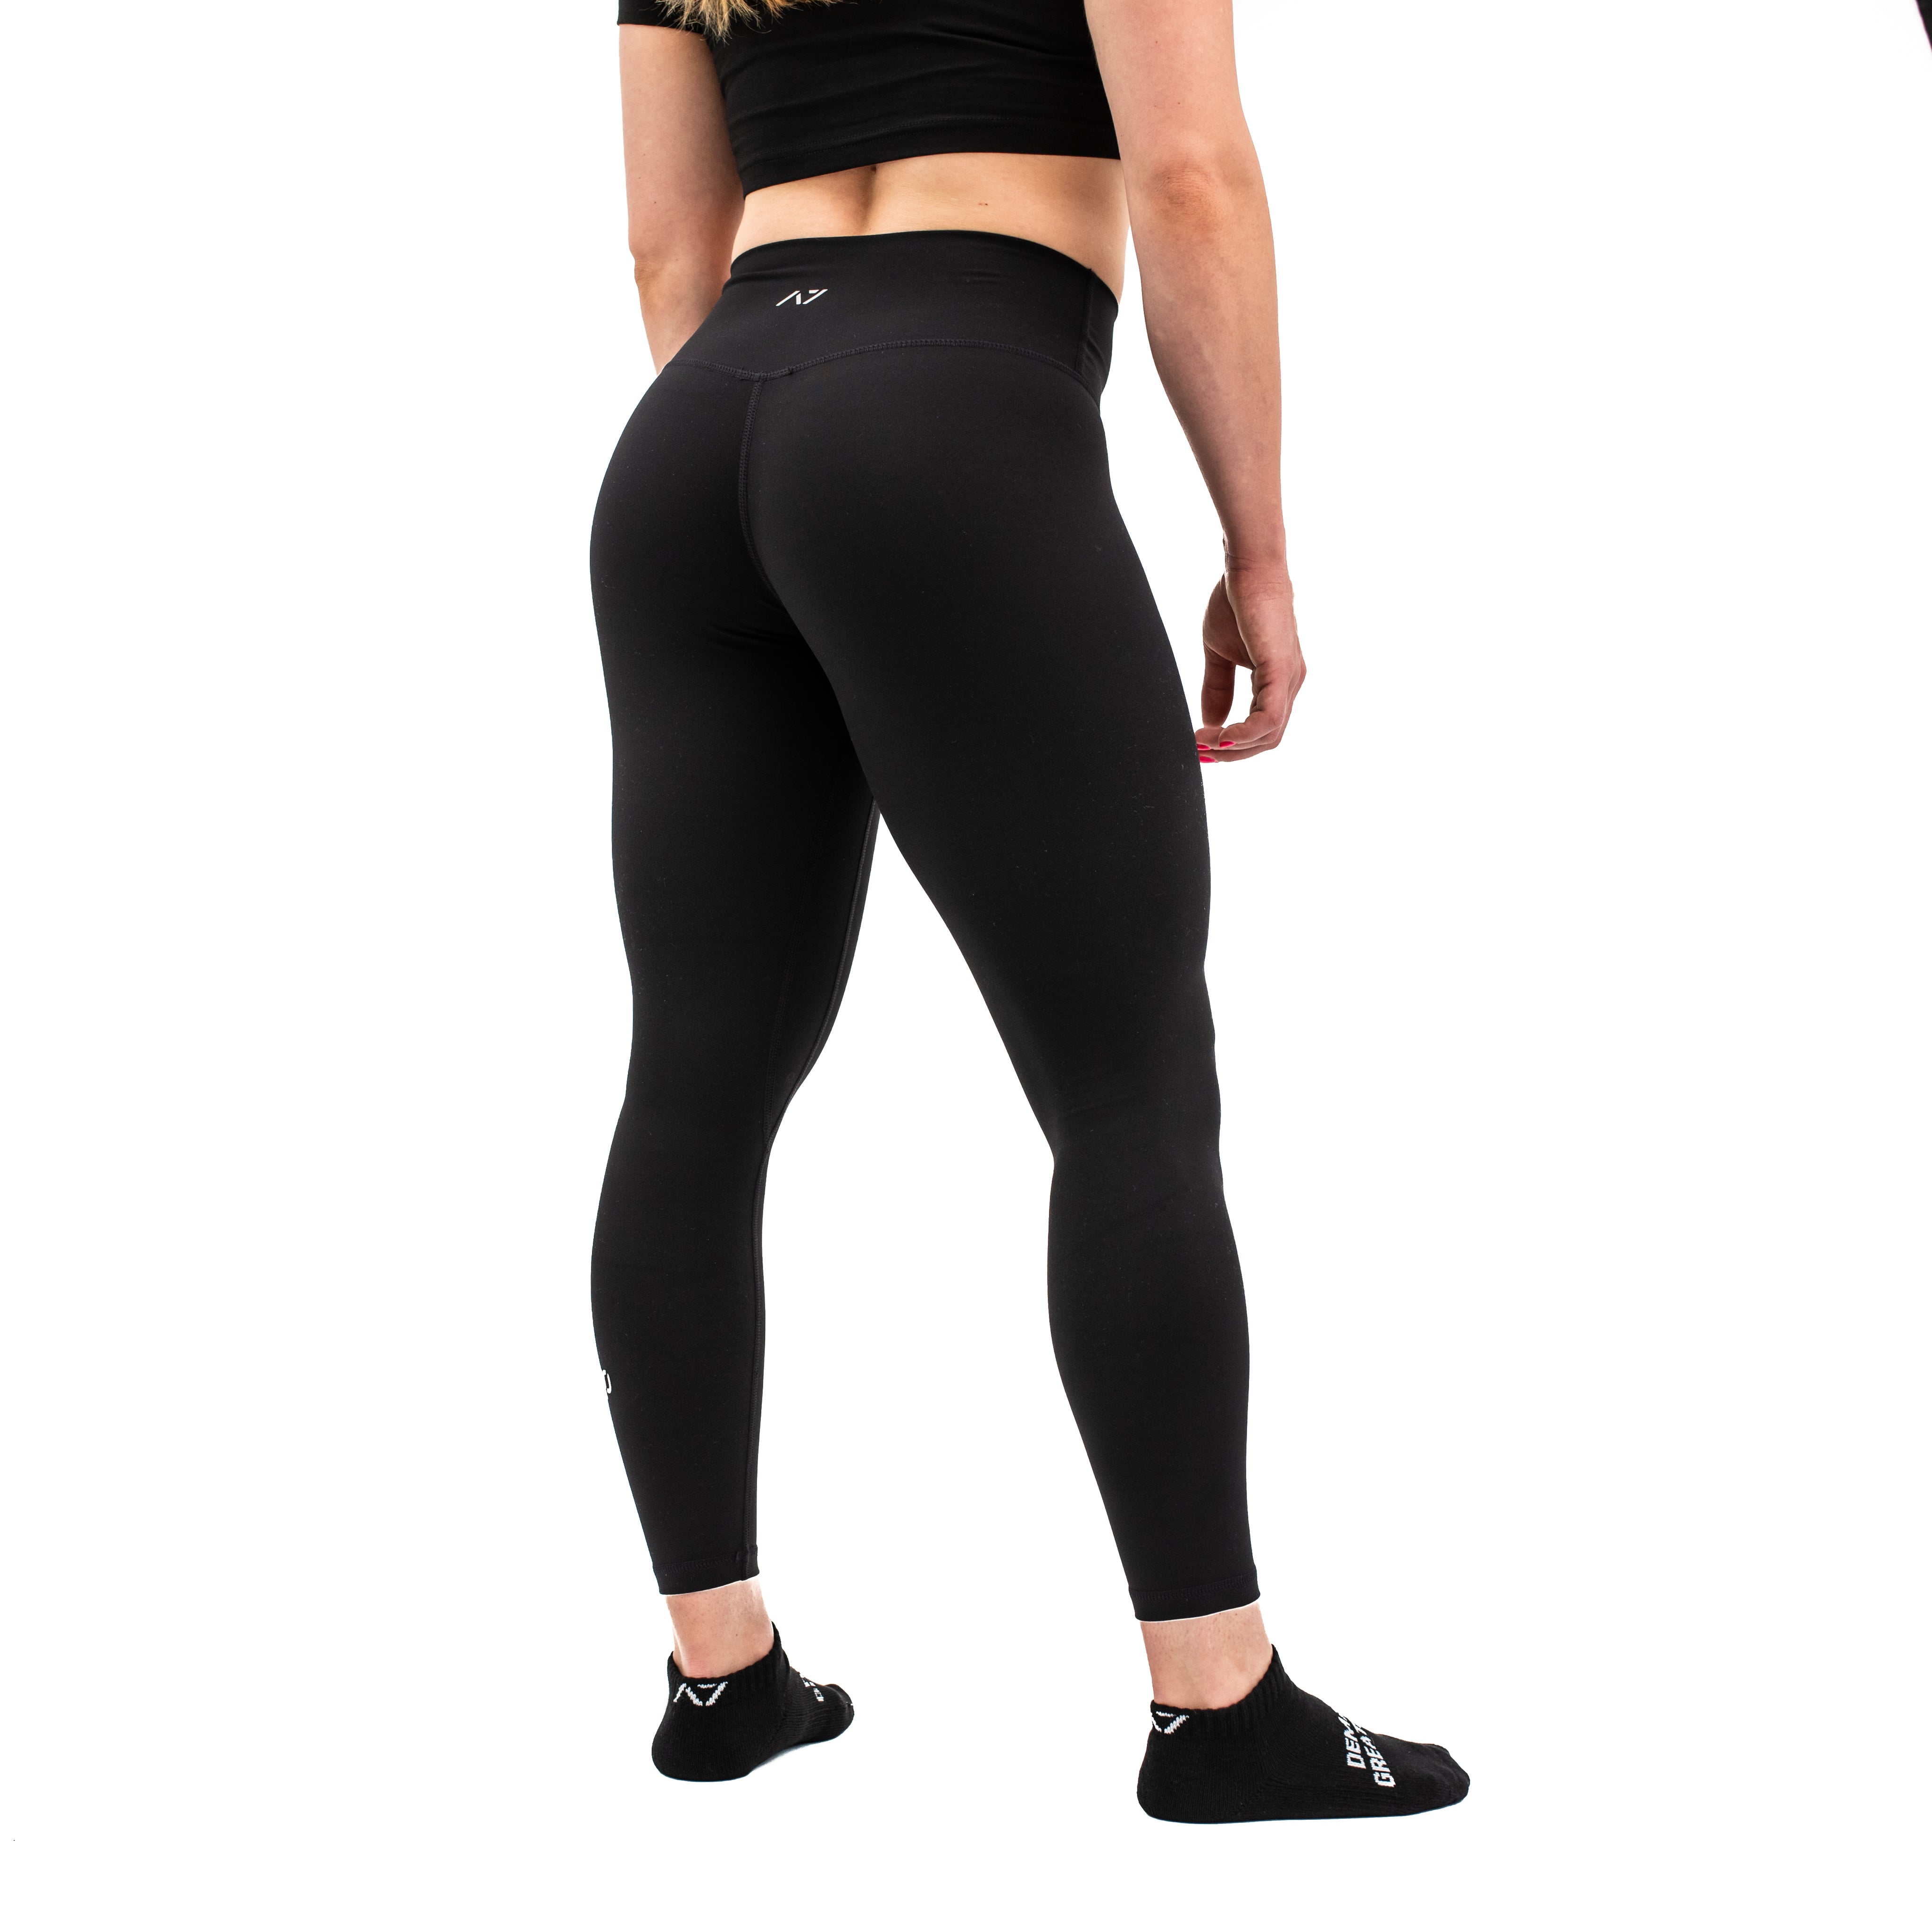 RBX Buttery Soft Squat Proof Black 7/8 Legging for Women, High Waist Tulip  Cut Ankle Length Running Tights with Seamless Hem Black XS at  Women's  Clothing store